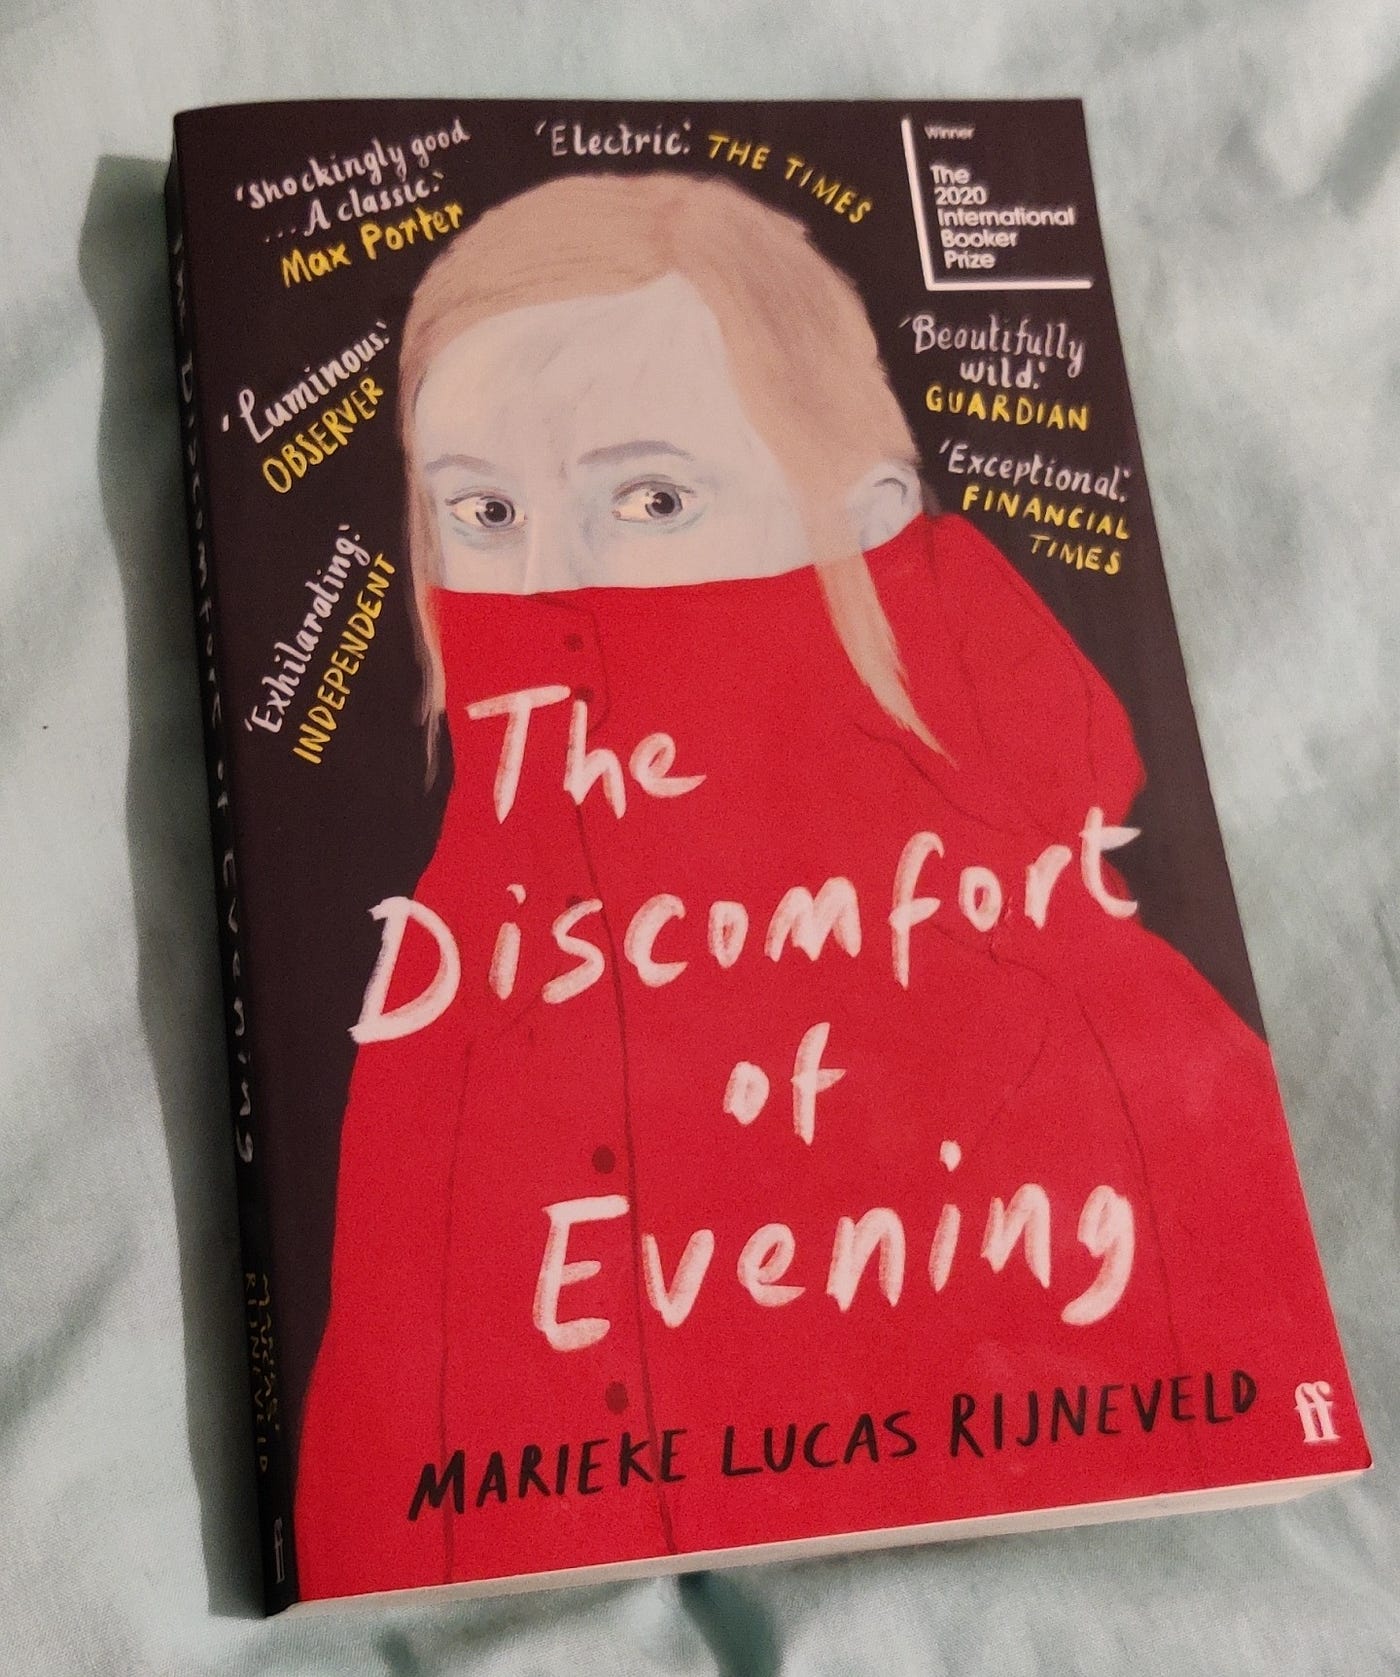 The Discomfort of Evening by Marieke Lucas Rijneveld by Ciarán Cooney Amateur Book Reviews Medium